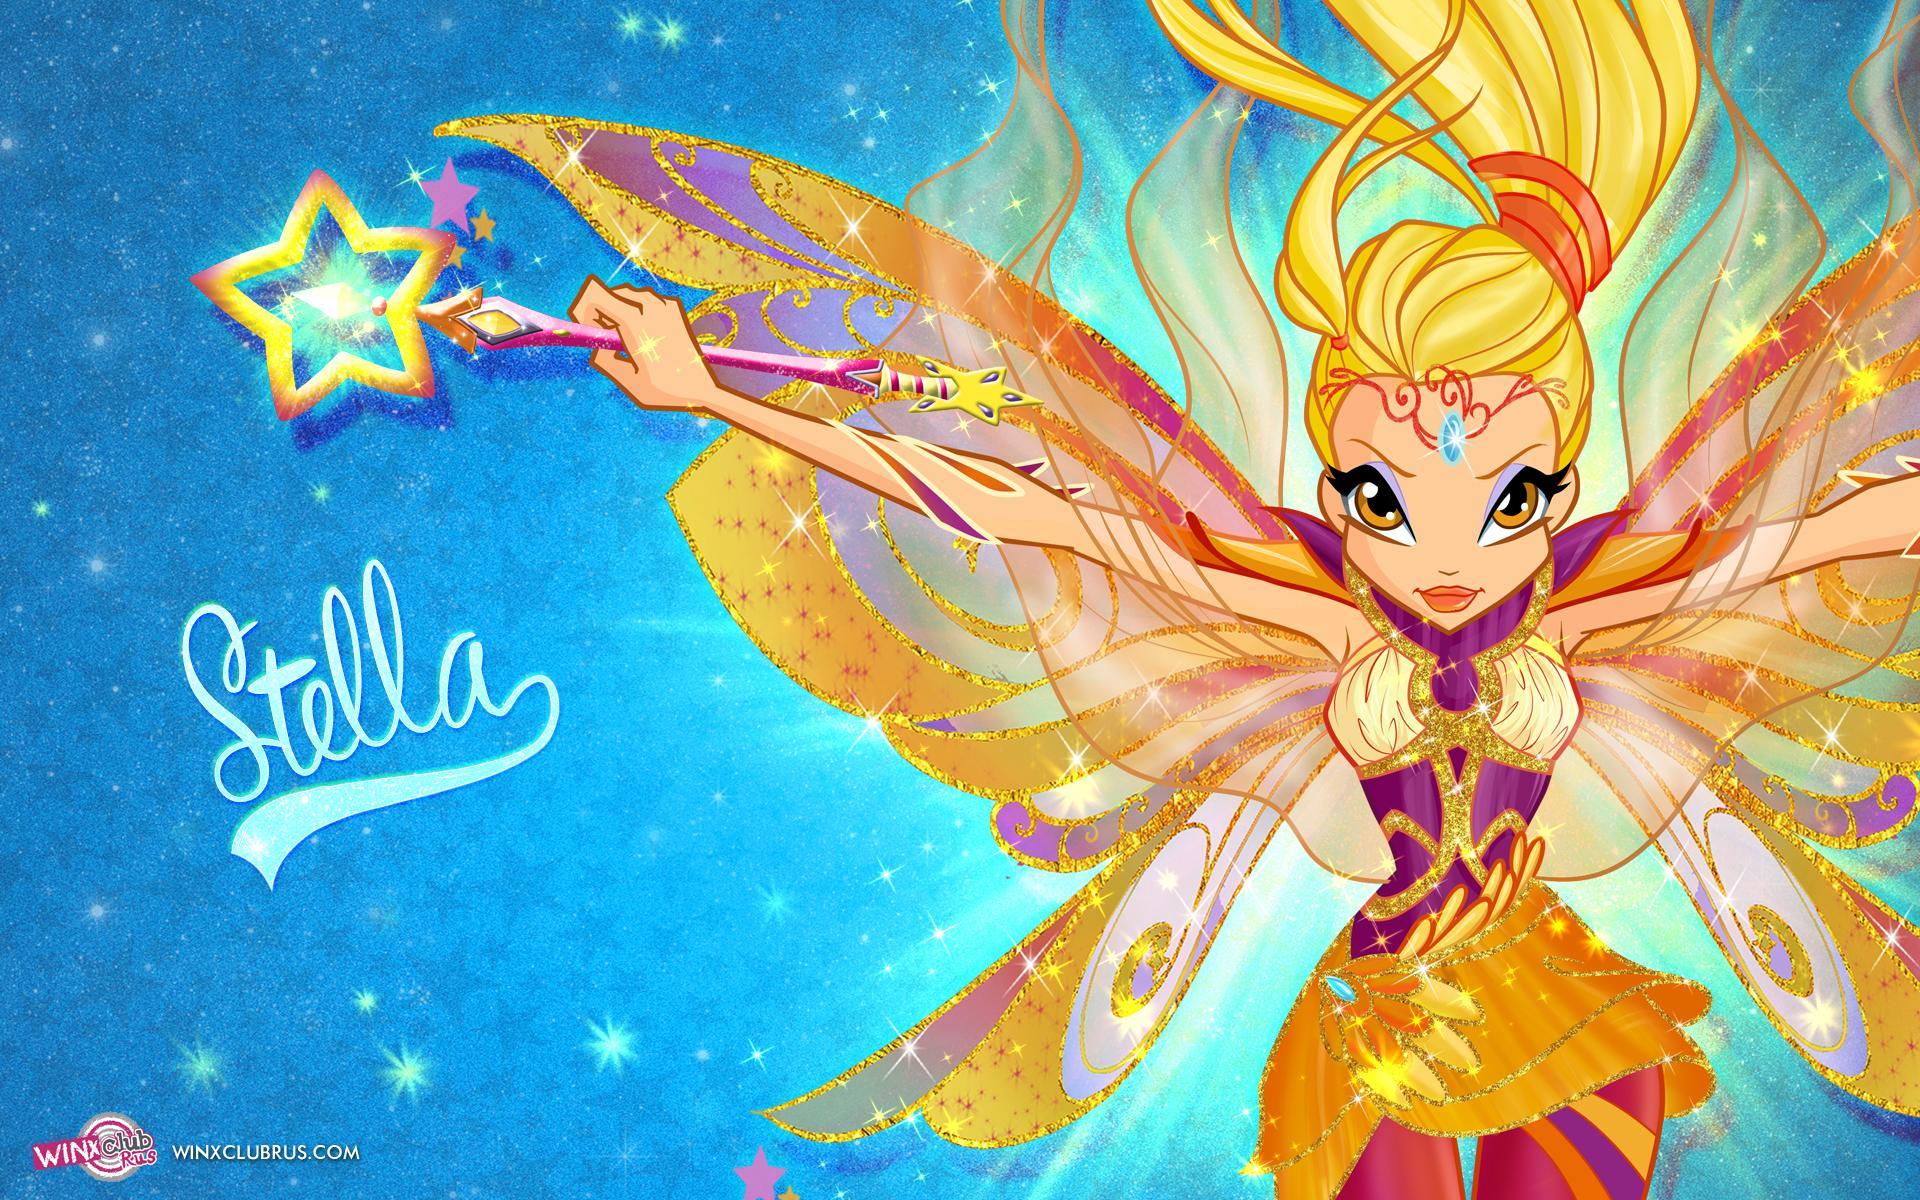 Winx Club new bright and colorful wallpaper with lots